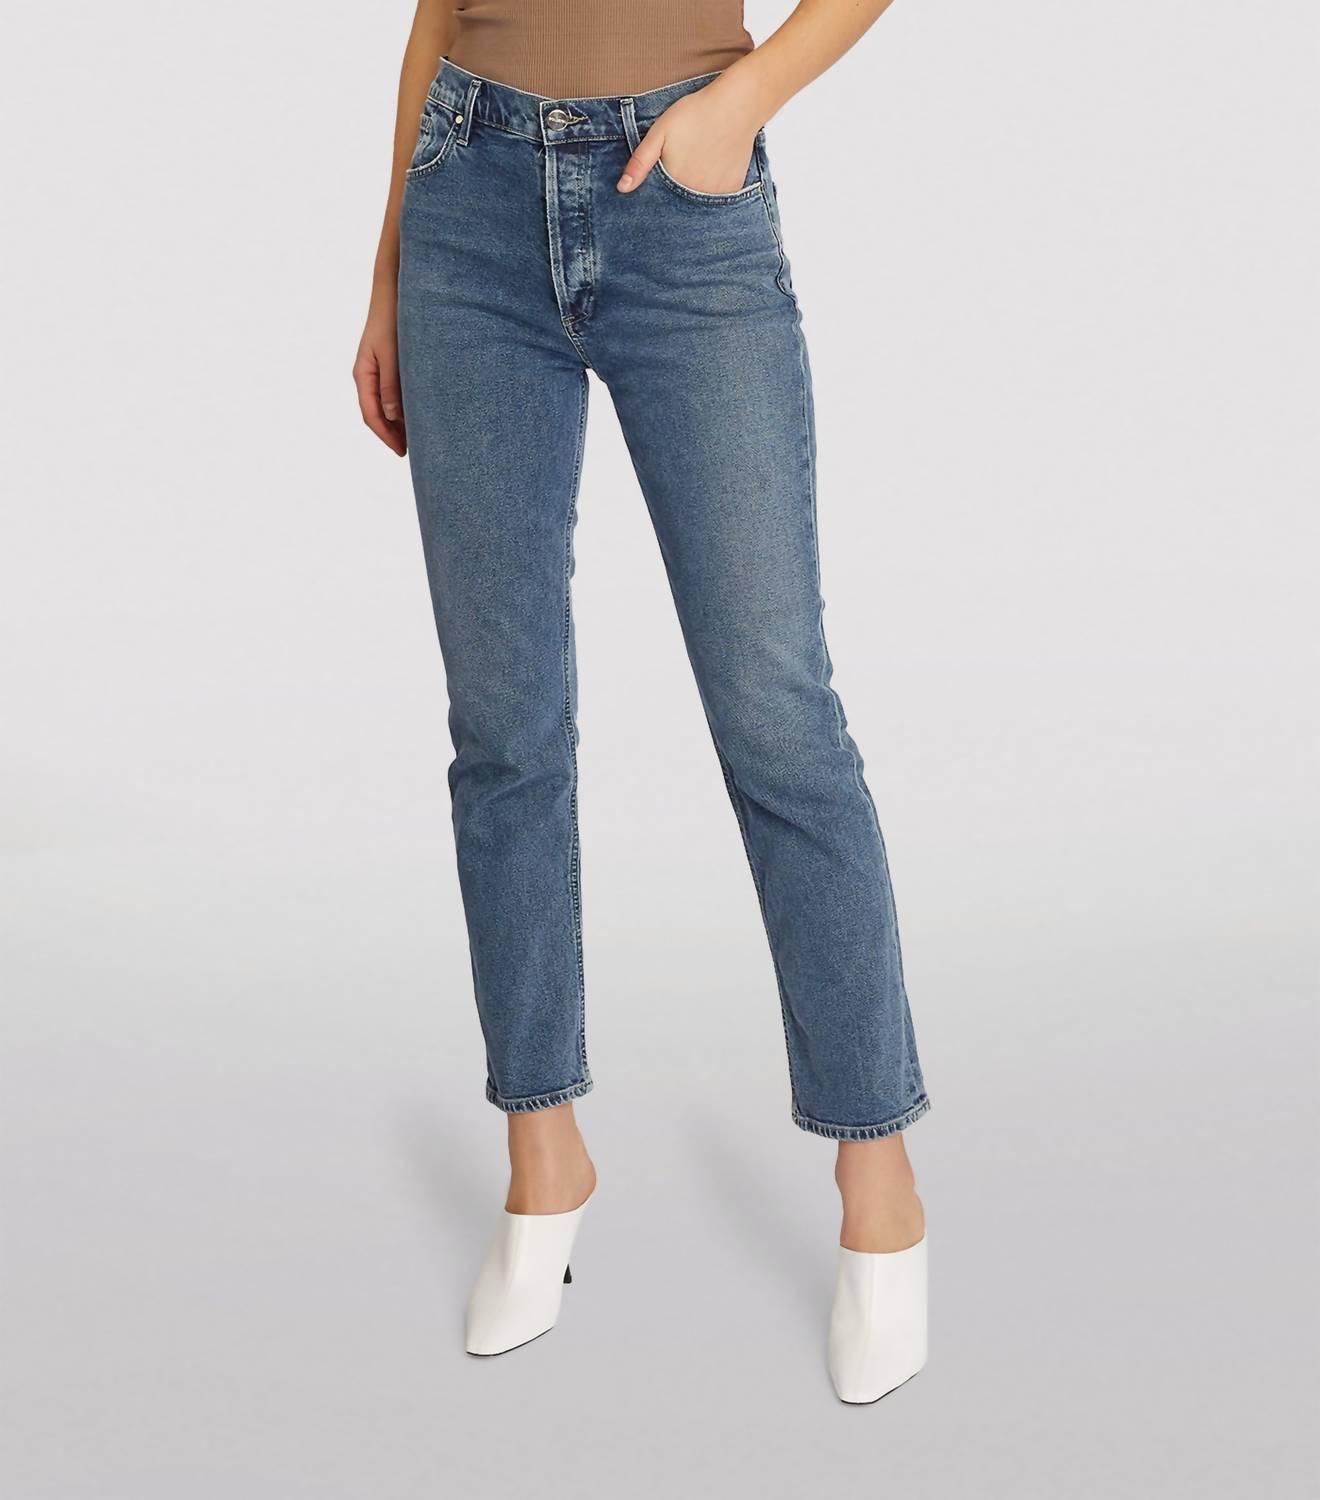 Goldsign The Morgan Jeans In Dunn In Blue